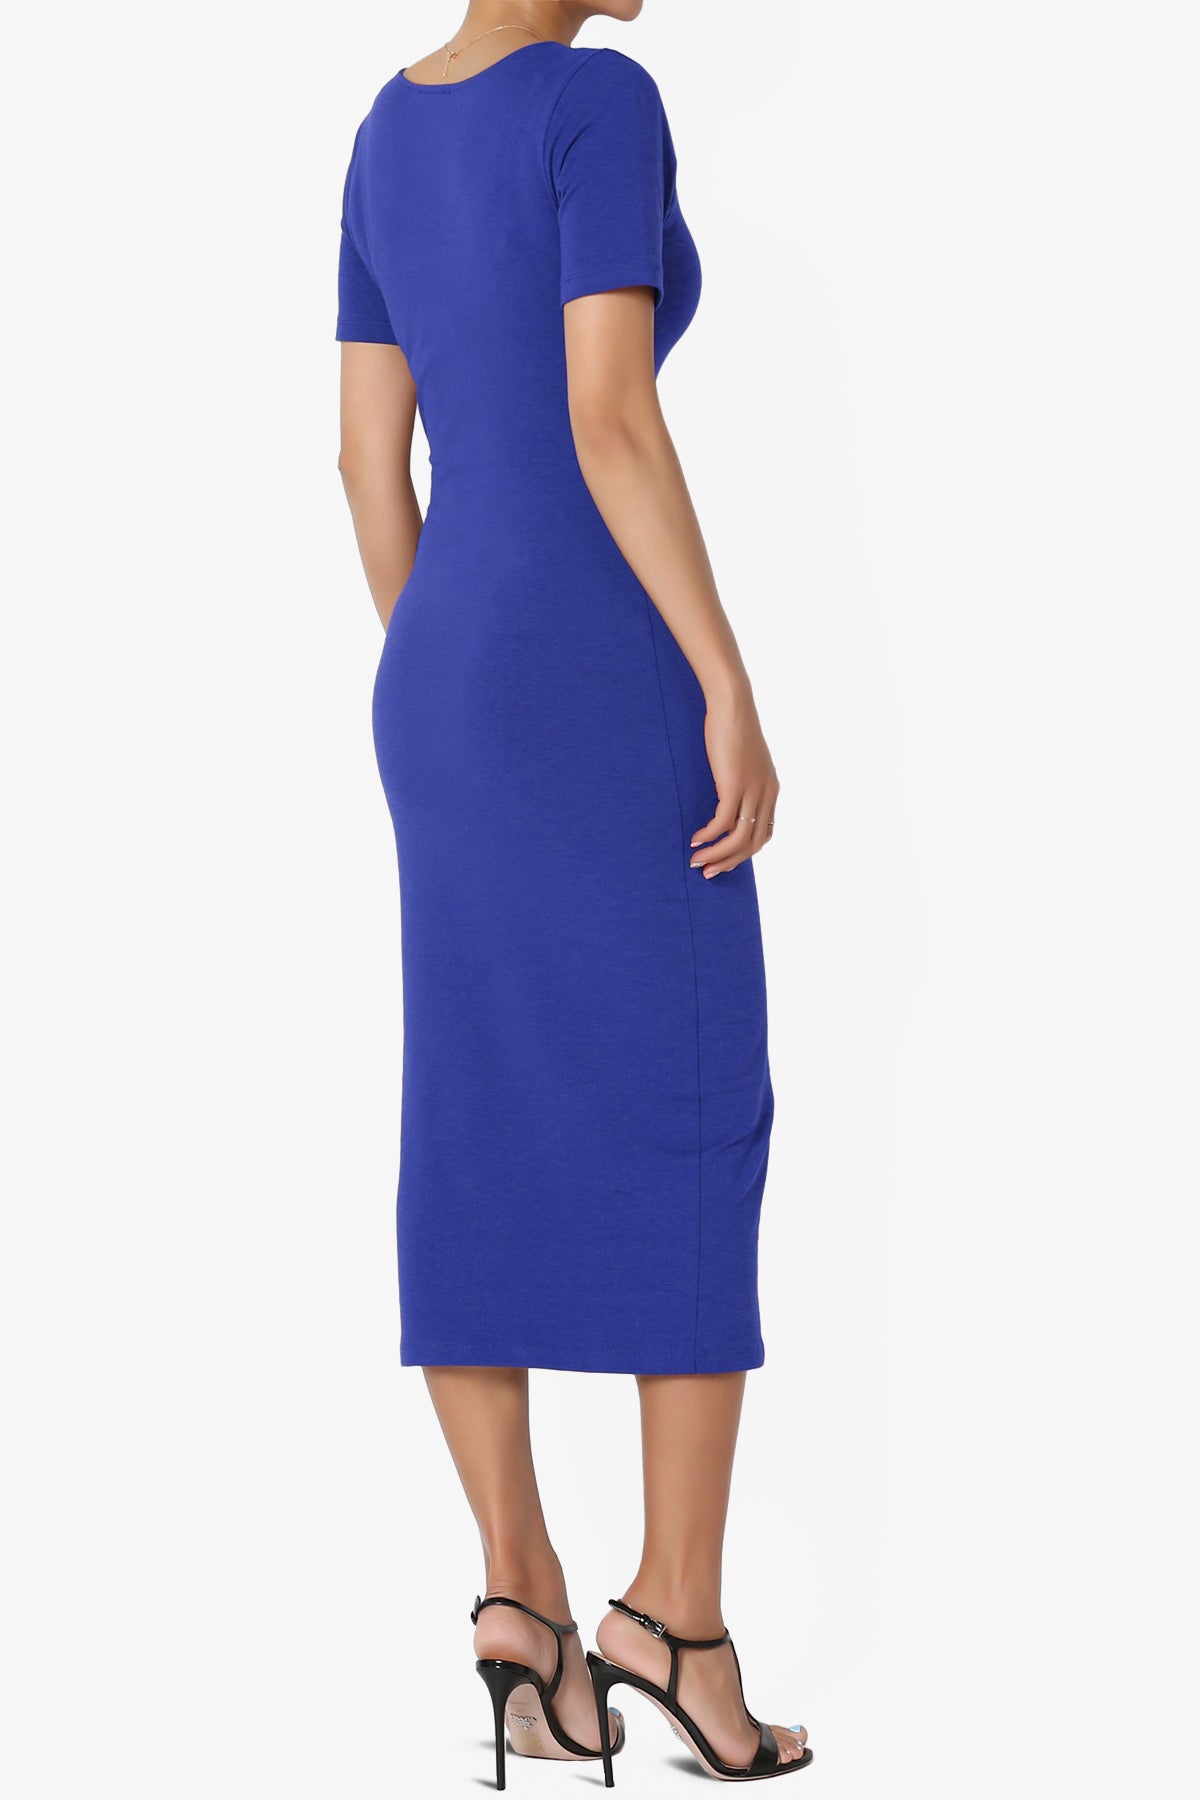 Load image into Gallery viewer, Fontella Short Sleeve Square Neck Bodycon Dress BRIGHT BLUE_4
